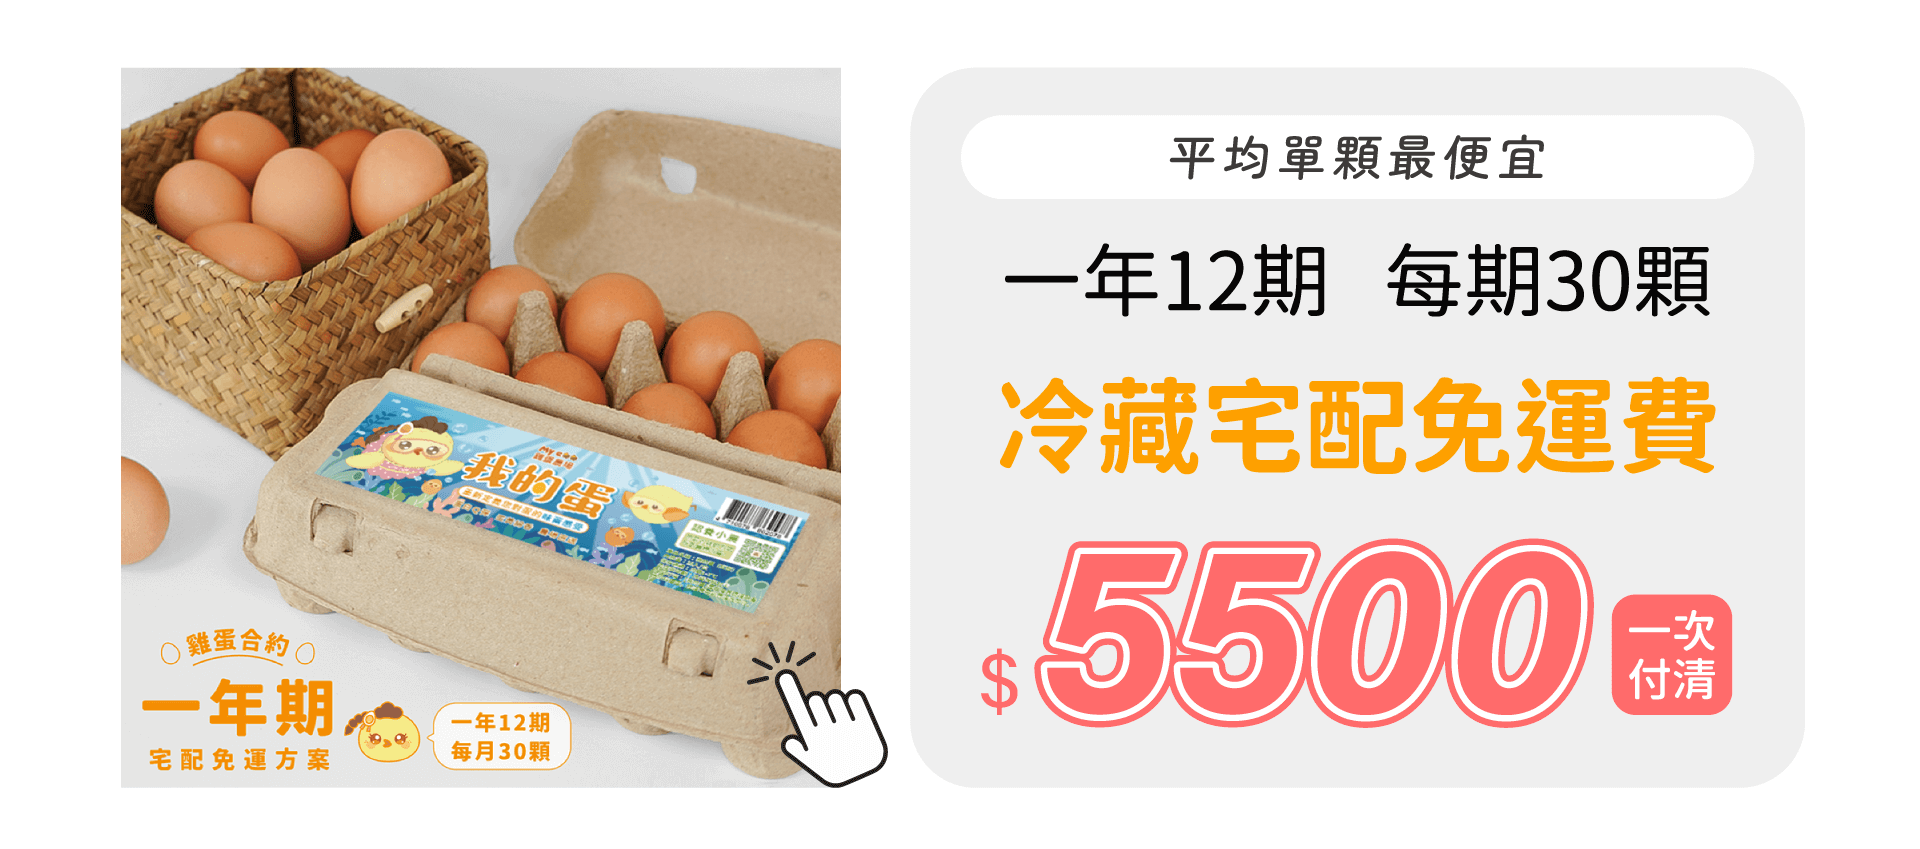 https://www.myegg.com.tw/product/A0004